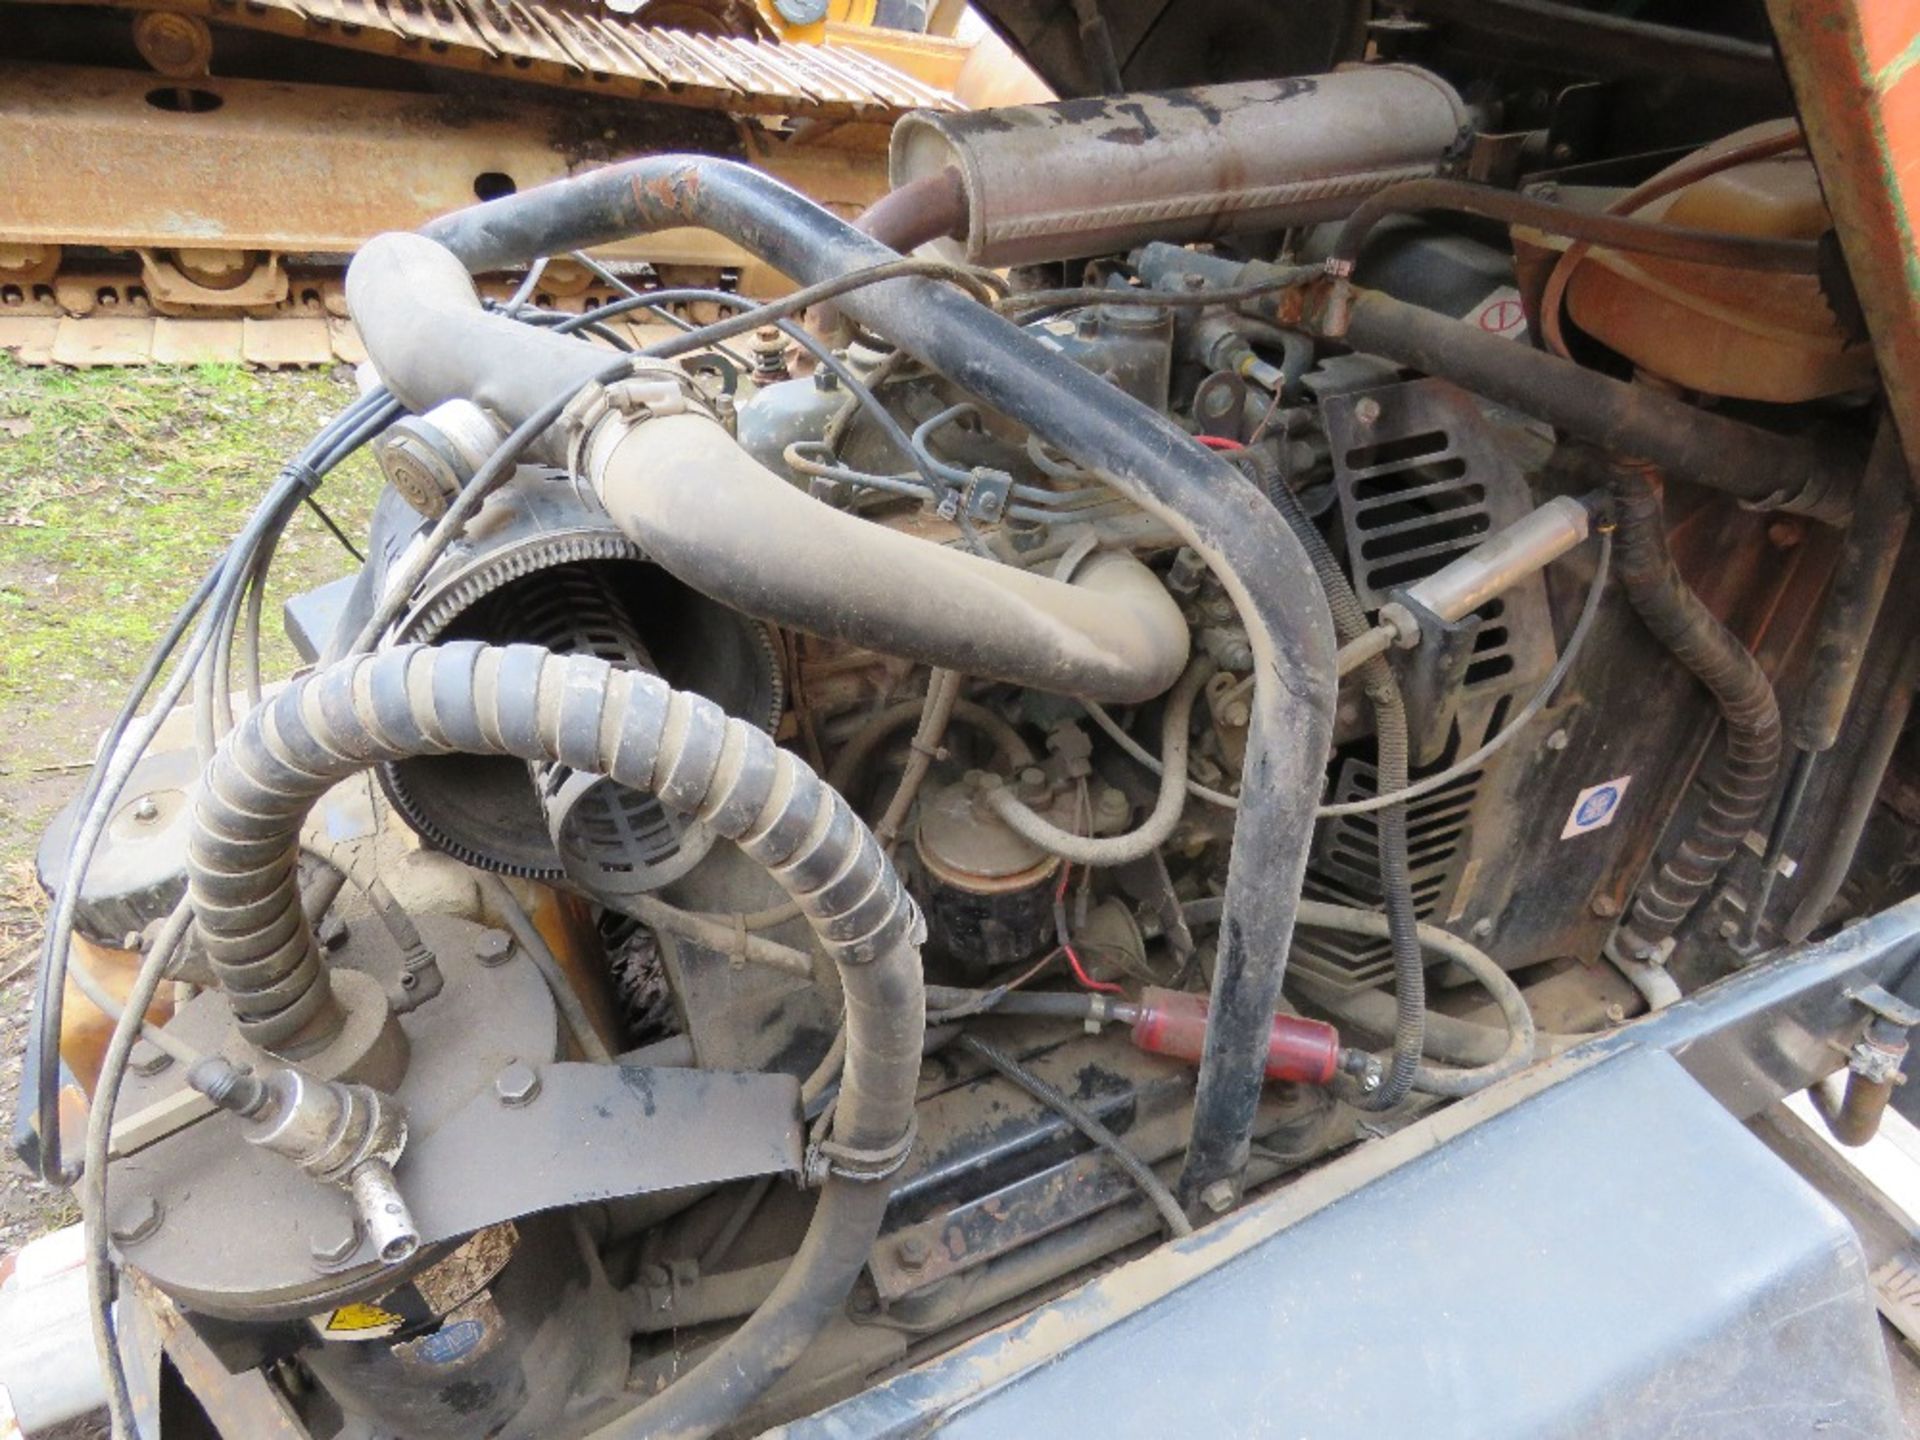 INGERSOLL RAND 720 TOWED ROAD COMPRESSOR. KUBOTA ENGINE. BEEN IN LONG TERM STORAGE, UNTESTED, CONDIT - Image 8 of 9